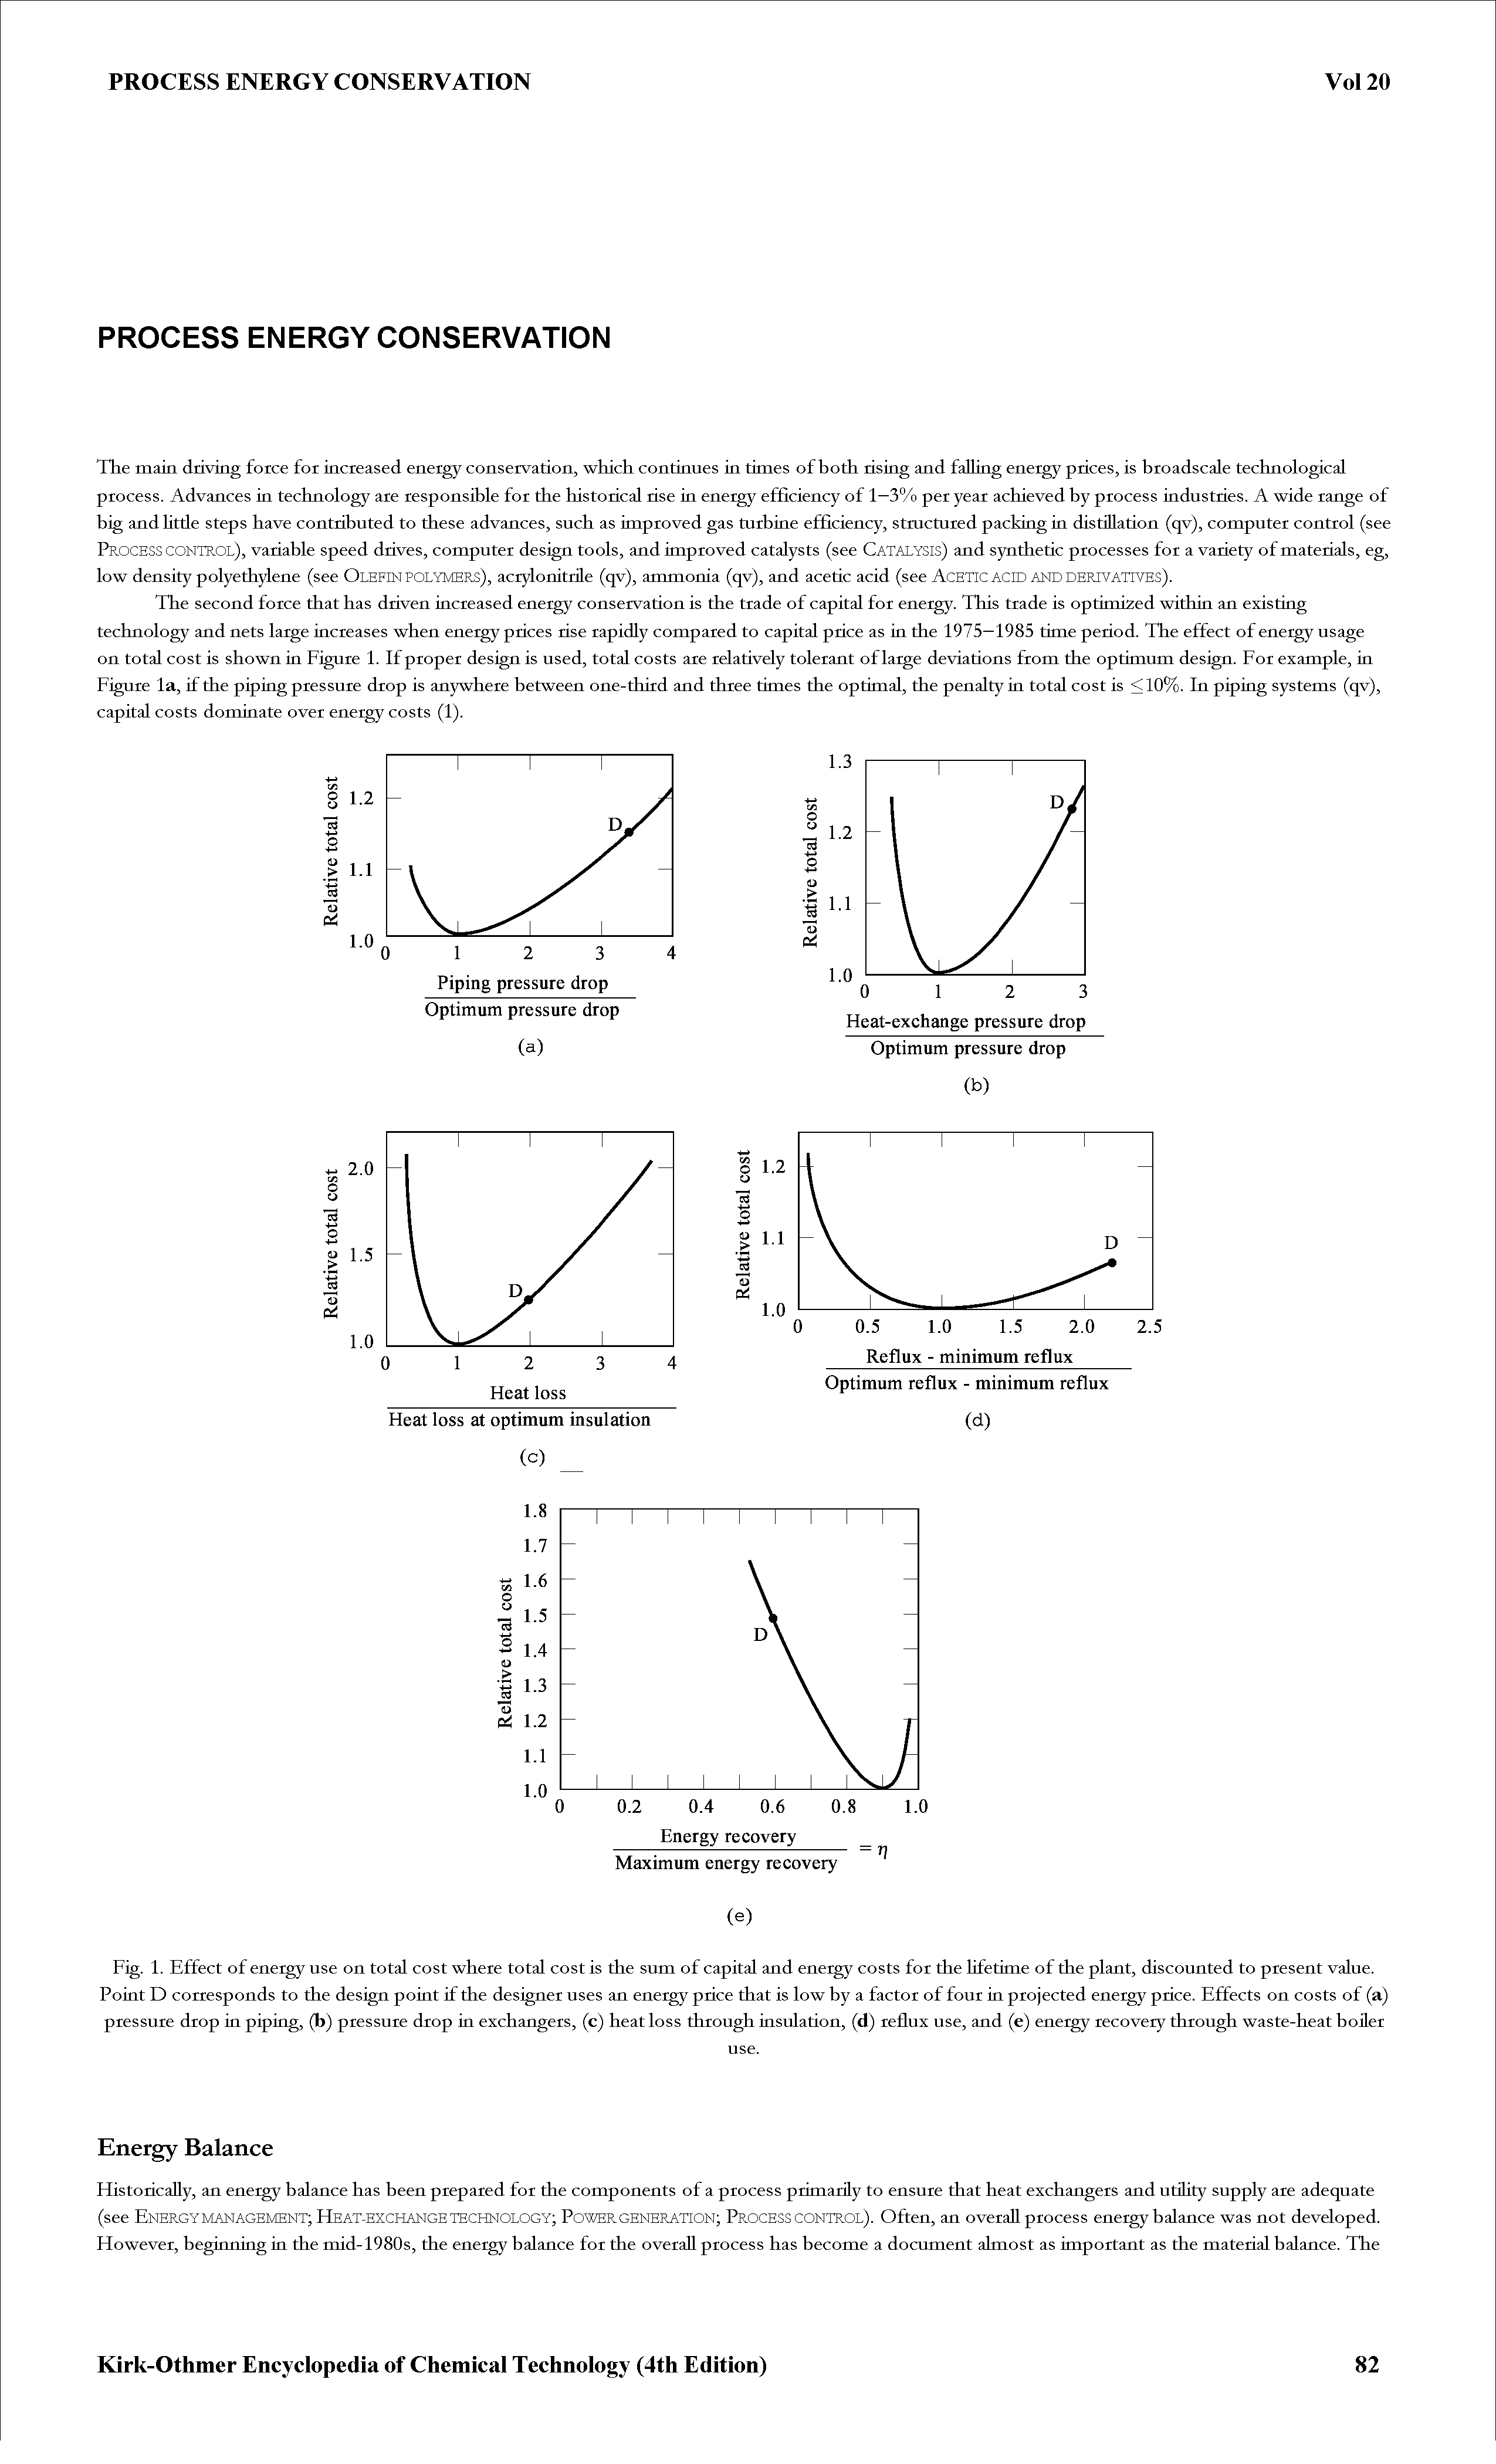 Fig. 1. Effect of energy use on total cost where total cost is the sum of capital and energy costs for the lifetime of the plant, discounted to present value. Point D corresponds to the design point if the designer uses an energy price that is low by a factor of four in projected energy price. Effects on costs of (a) pressure drop in piping, (b) pressure drop in exchangers, (c) heat loss through insulation, (d) reflux use, and (e) energy recovery through waste-heat boiler...